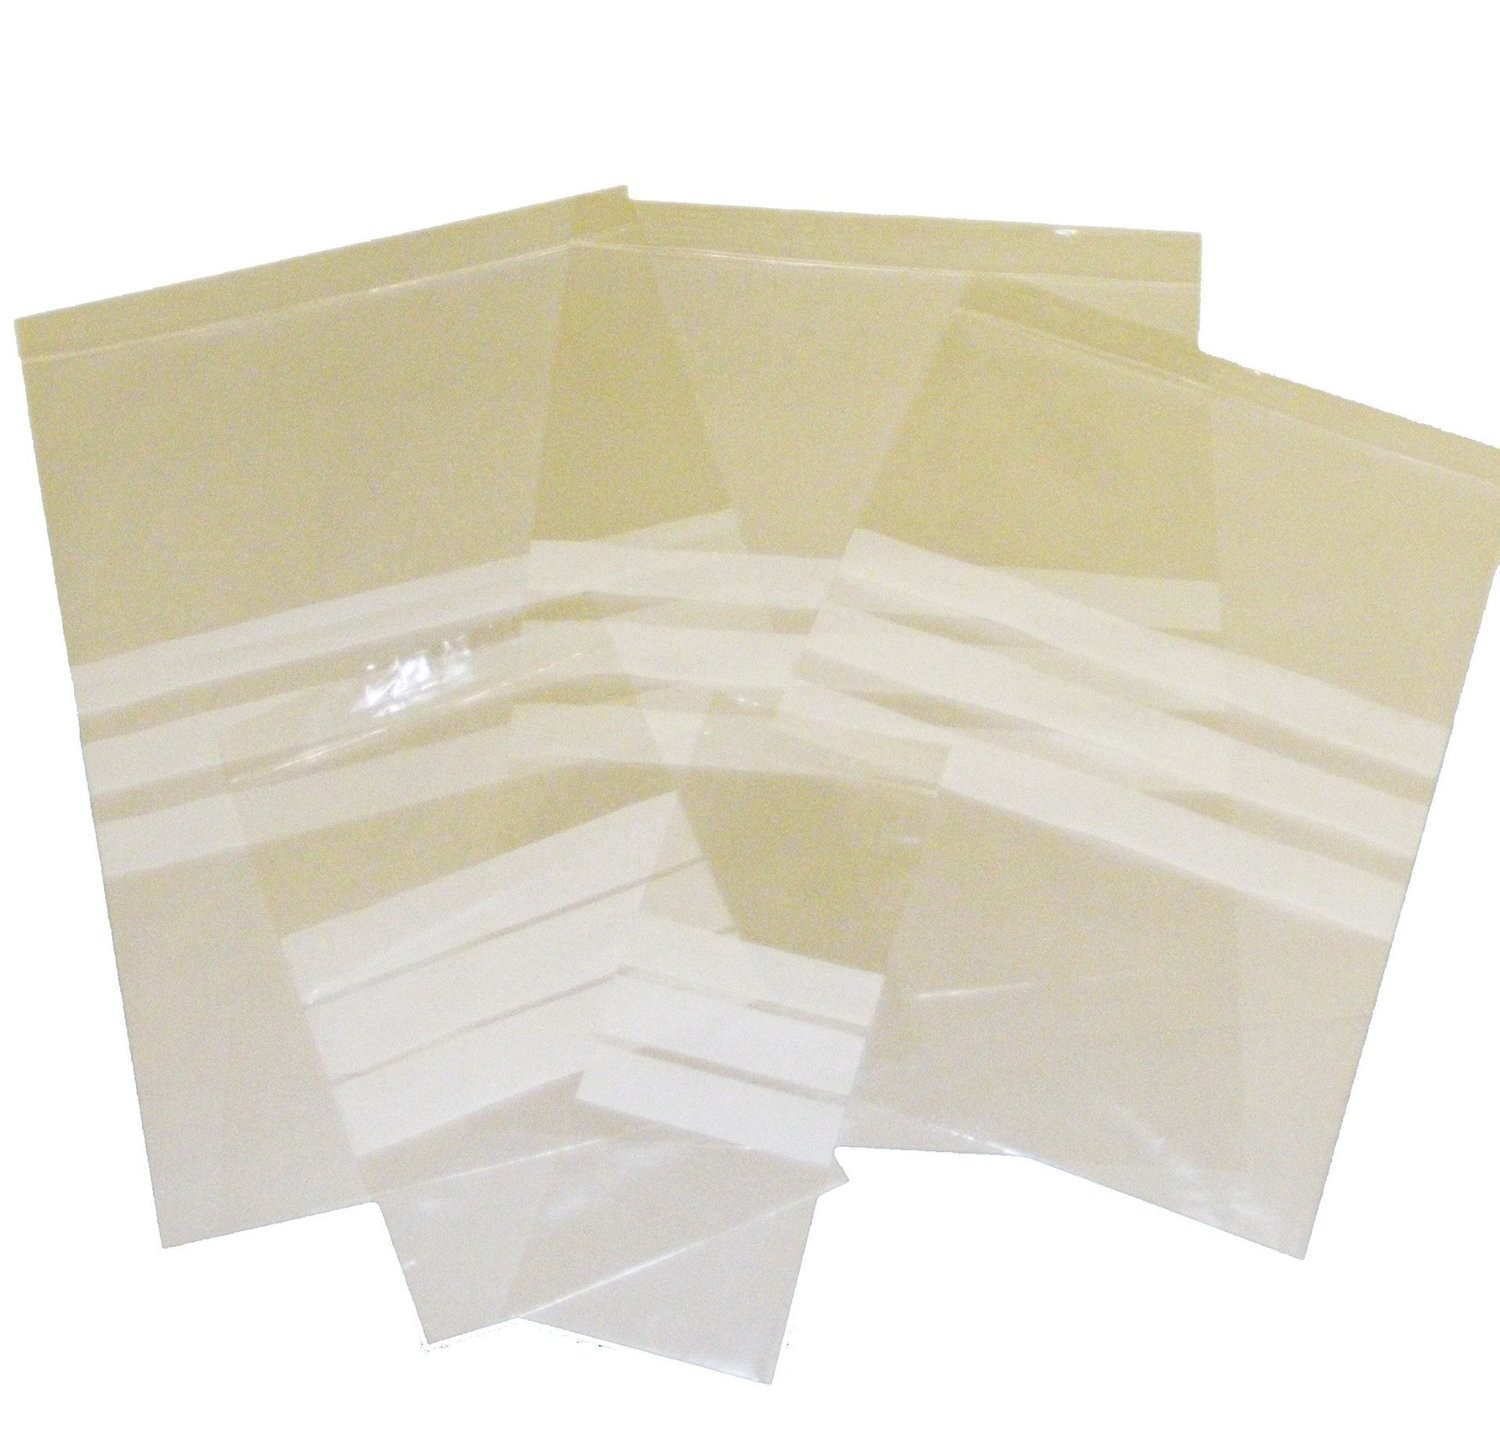 SPECIAL OFFER 1000 Write on Panel Grip Seal Bags 1.5" x 2.5"